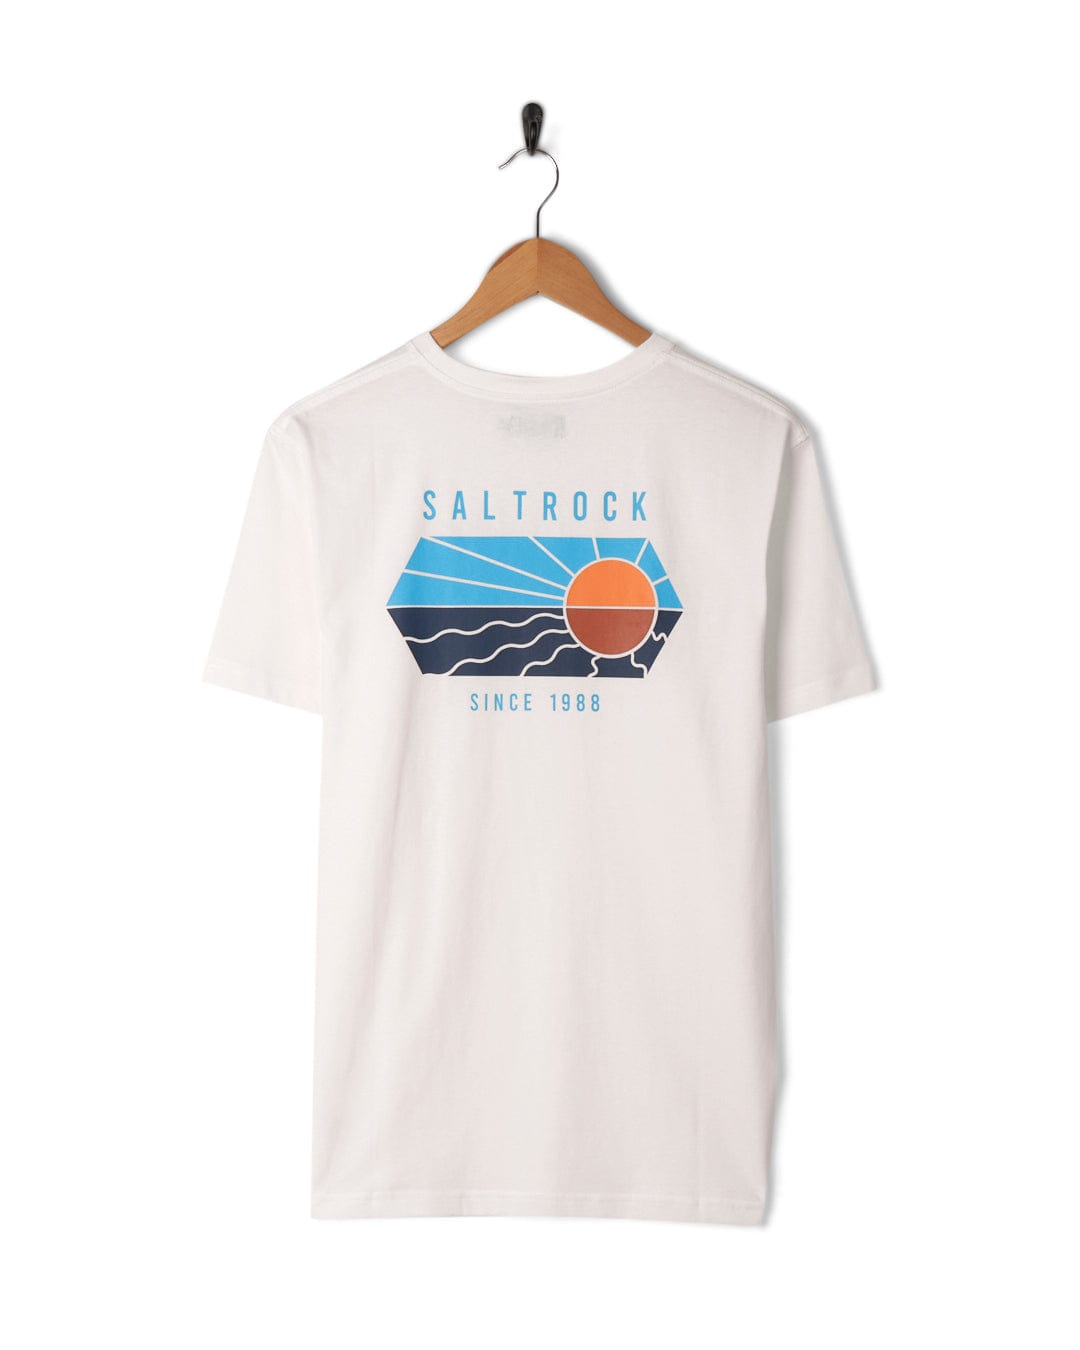 A soft Vantage Colour - Mens Short Sleeve T-Shirt - White with an image of a sunset on it by Saltrock.